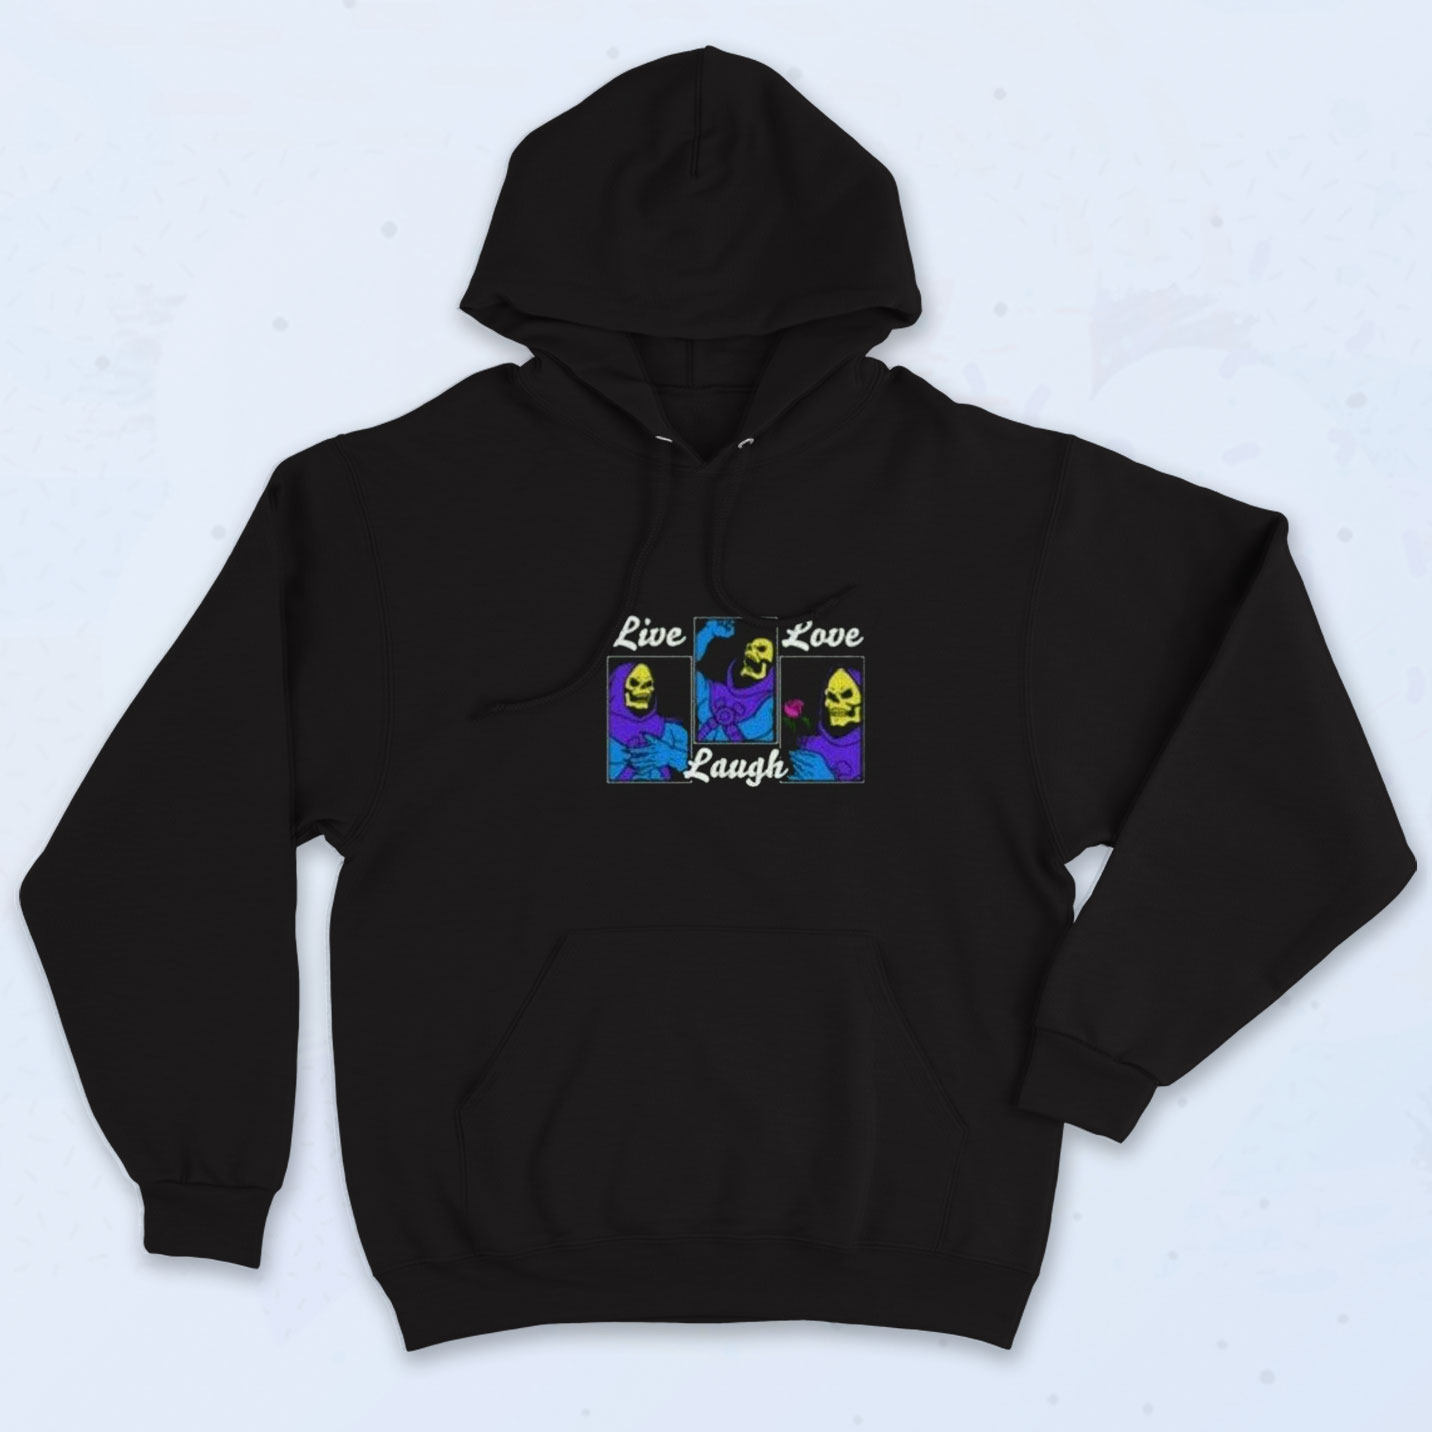 Cheap Urban Clothing Skeletor Supervillain Hoodie - 90sclothes.com